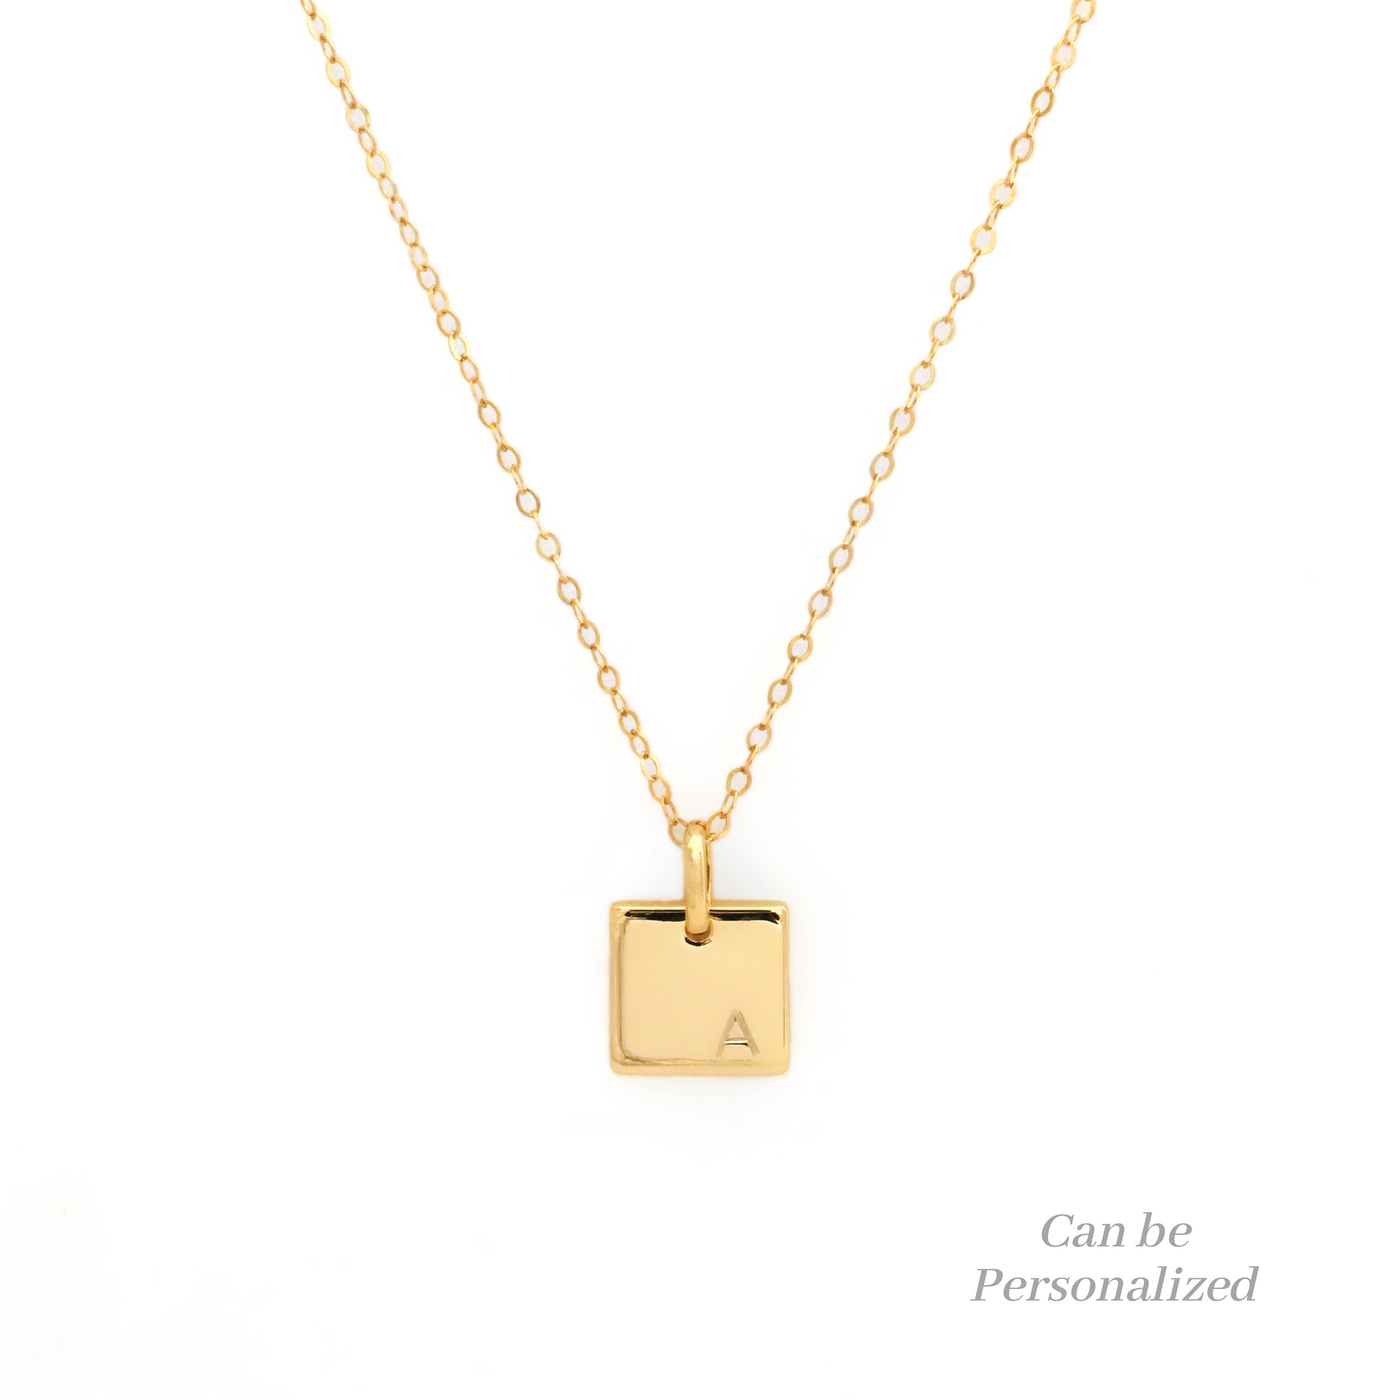 Gold personalized necklace